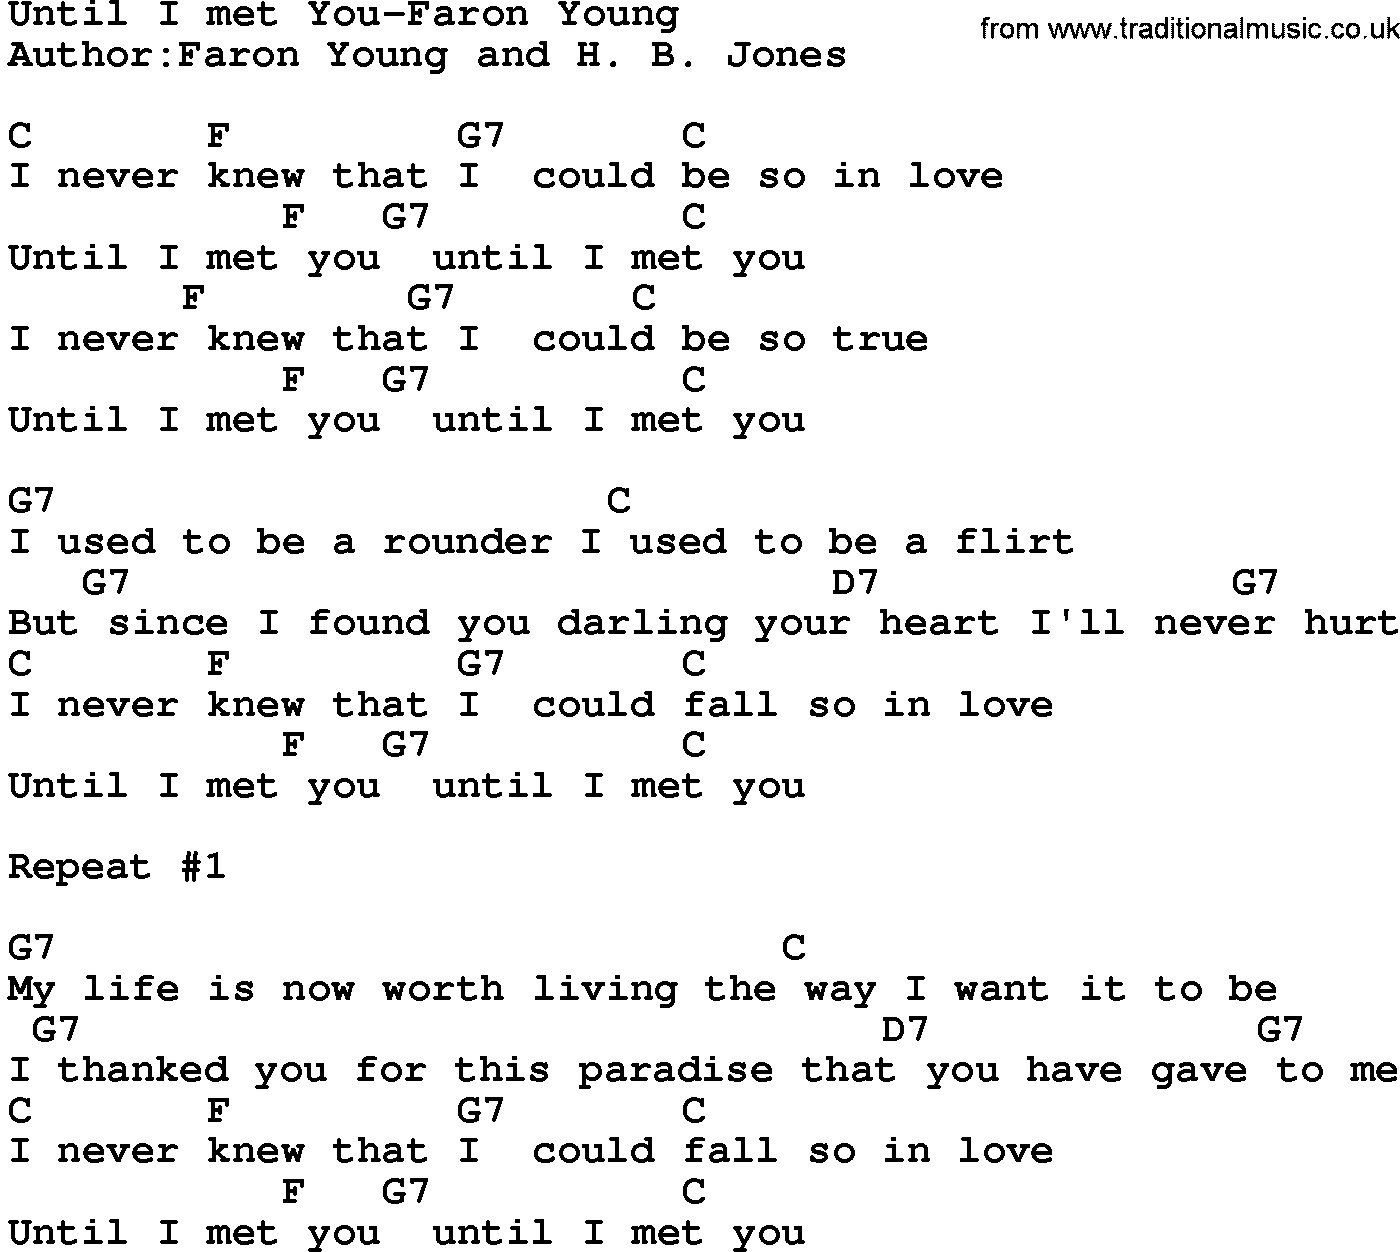 Country music song: Until I Met You-Faron Young lyrics and chords